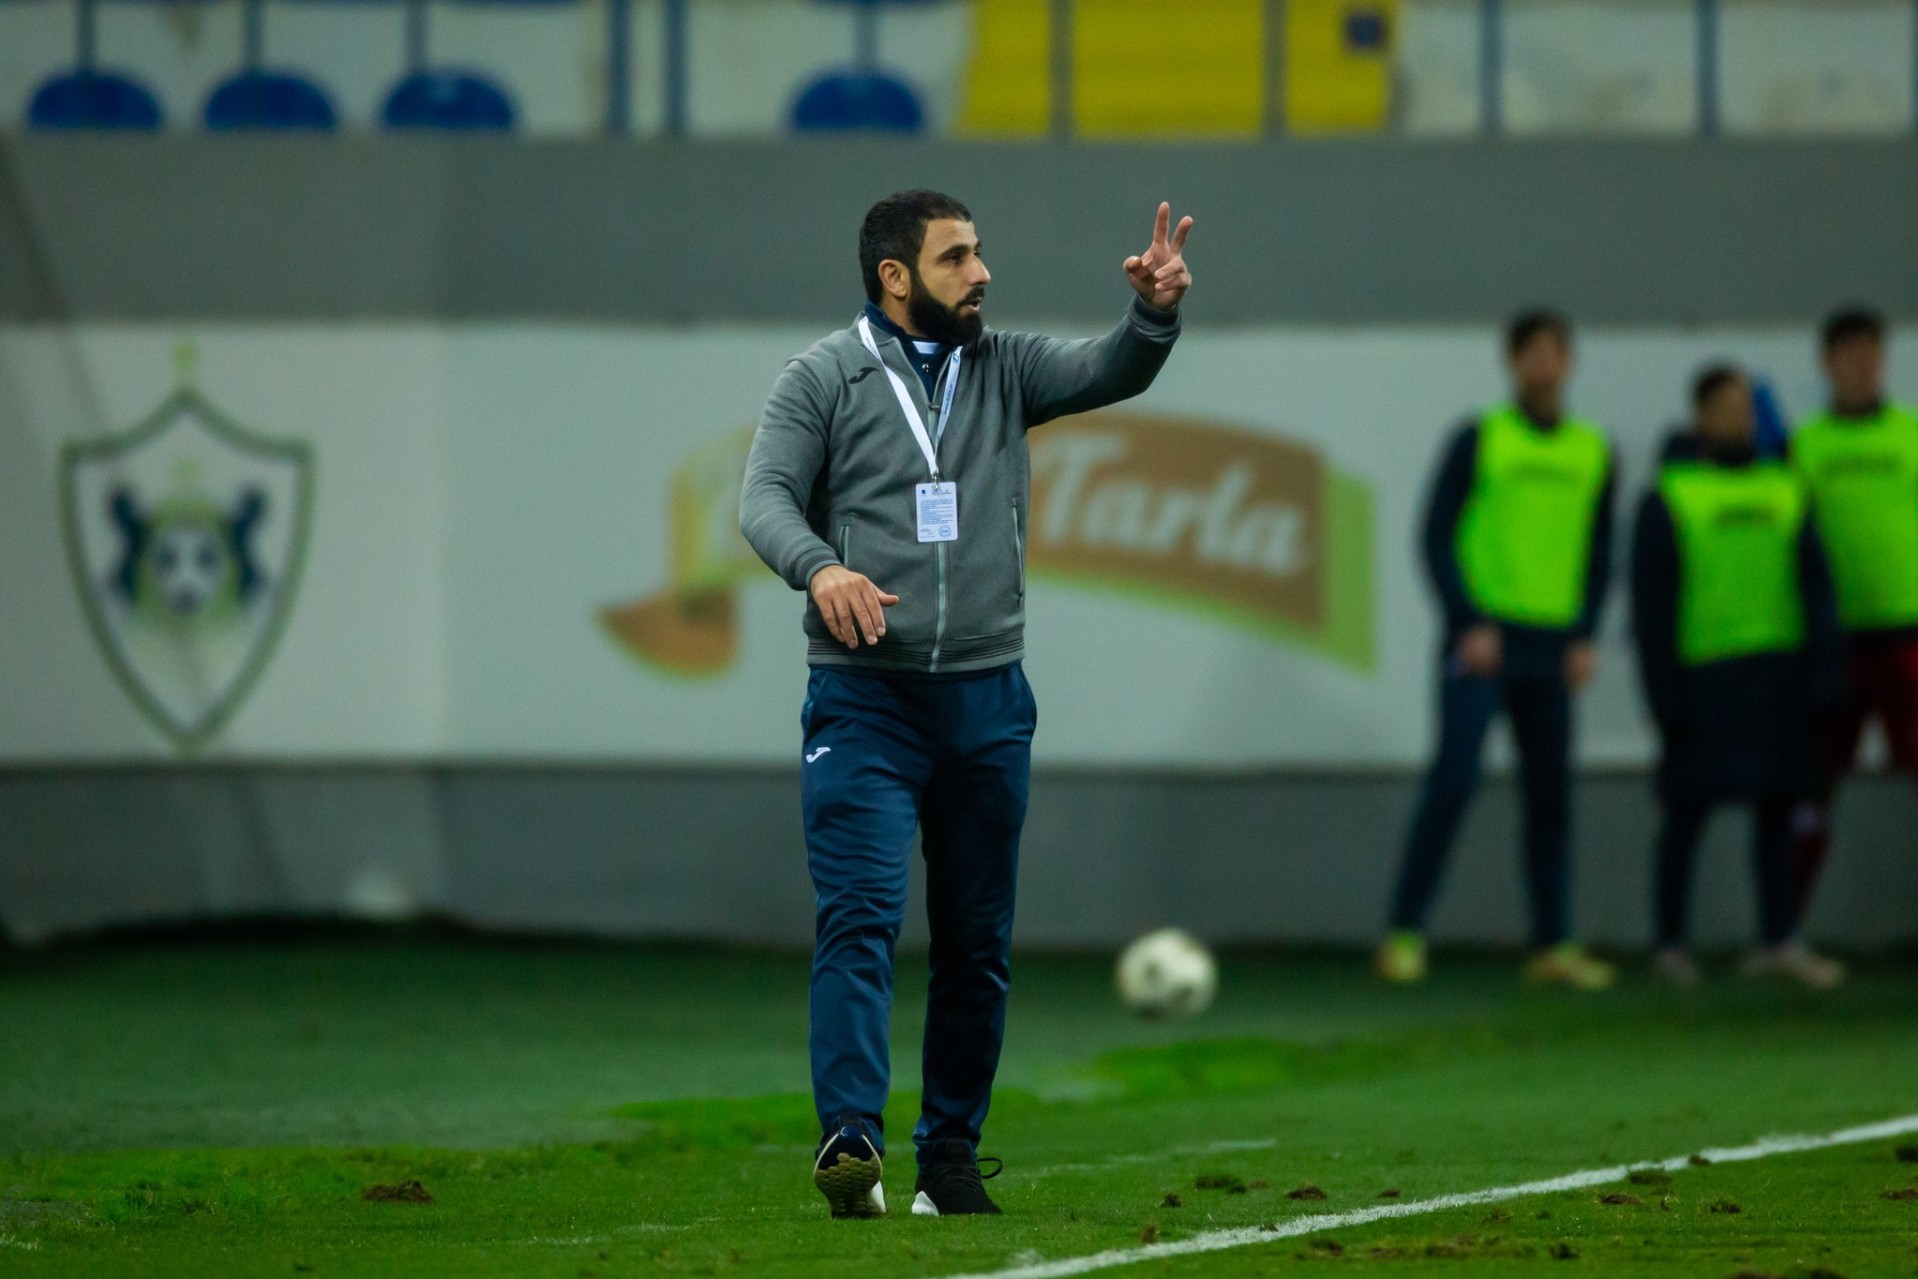 Rashad Sadygov: "VAR was right about the decision"